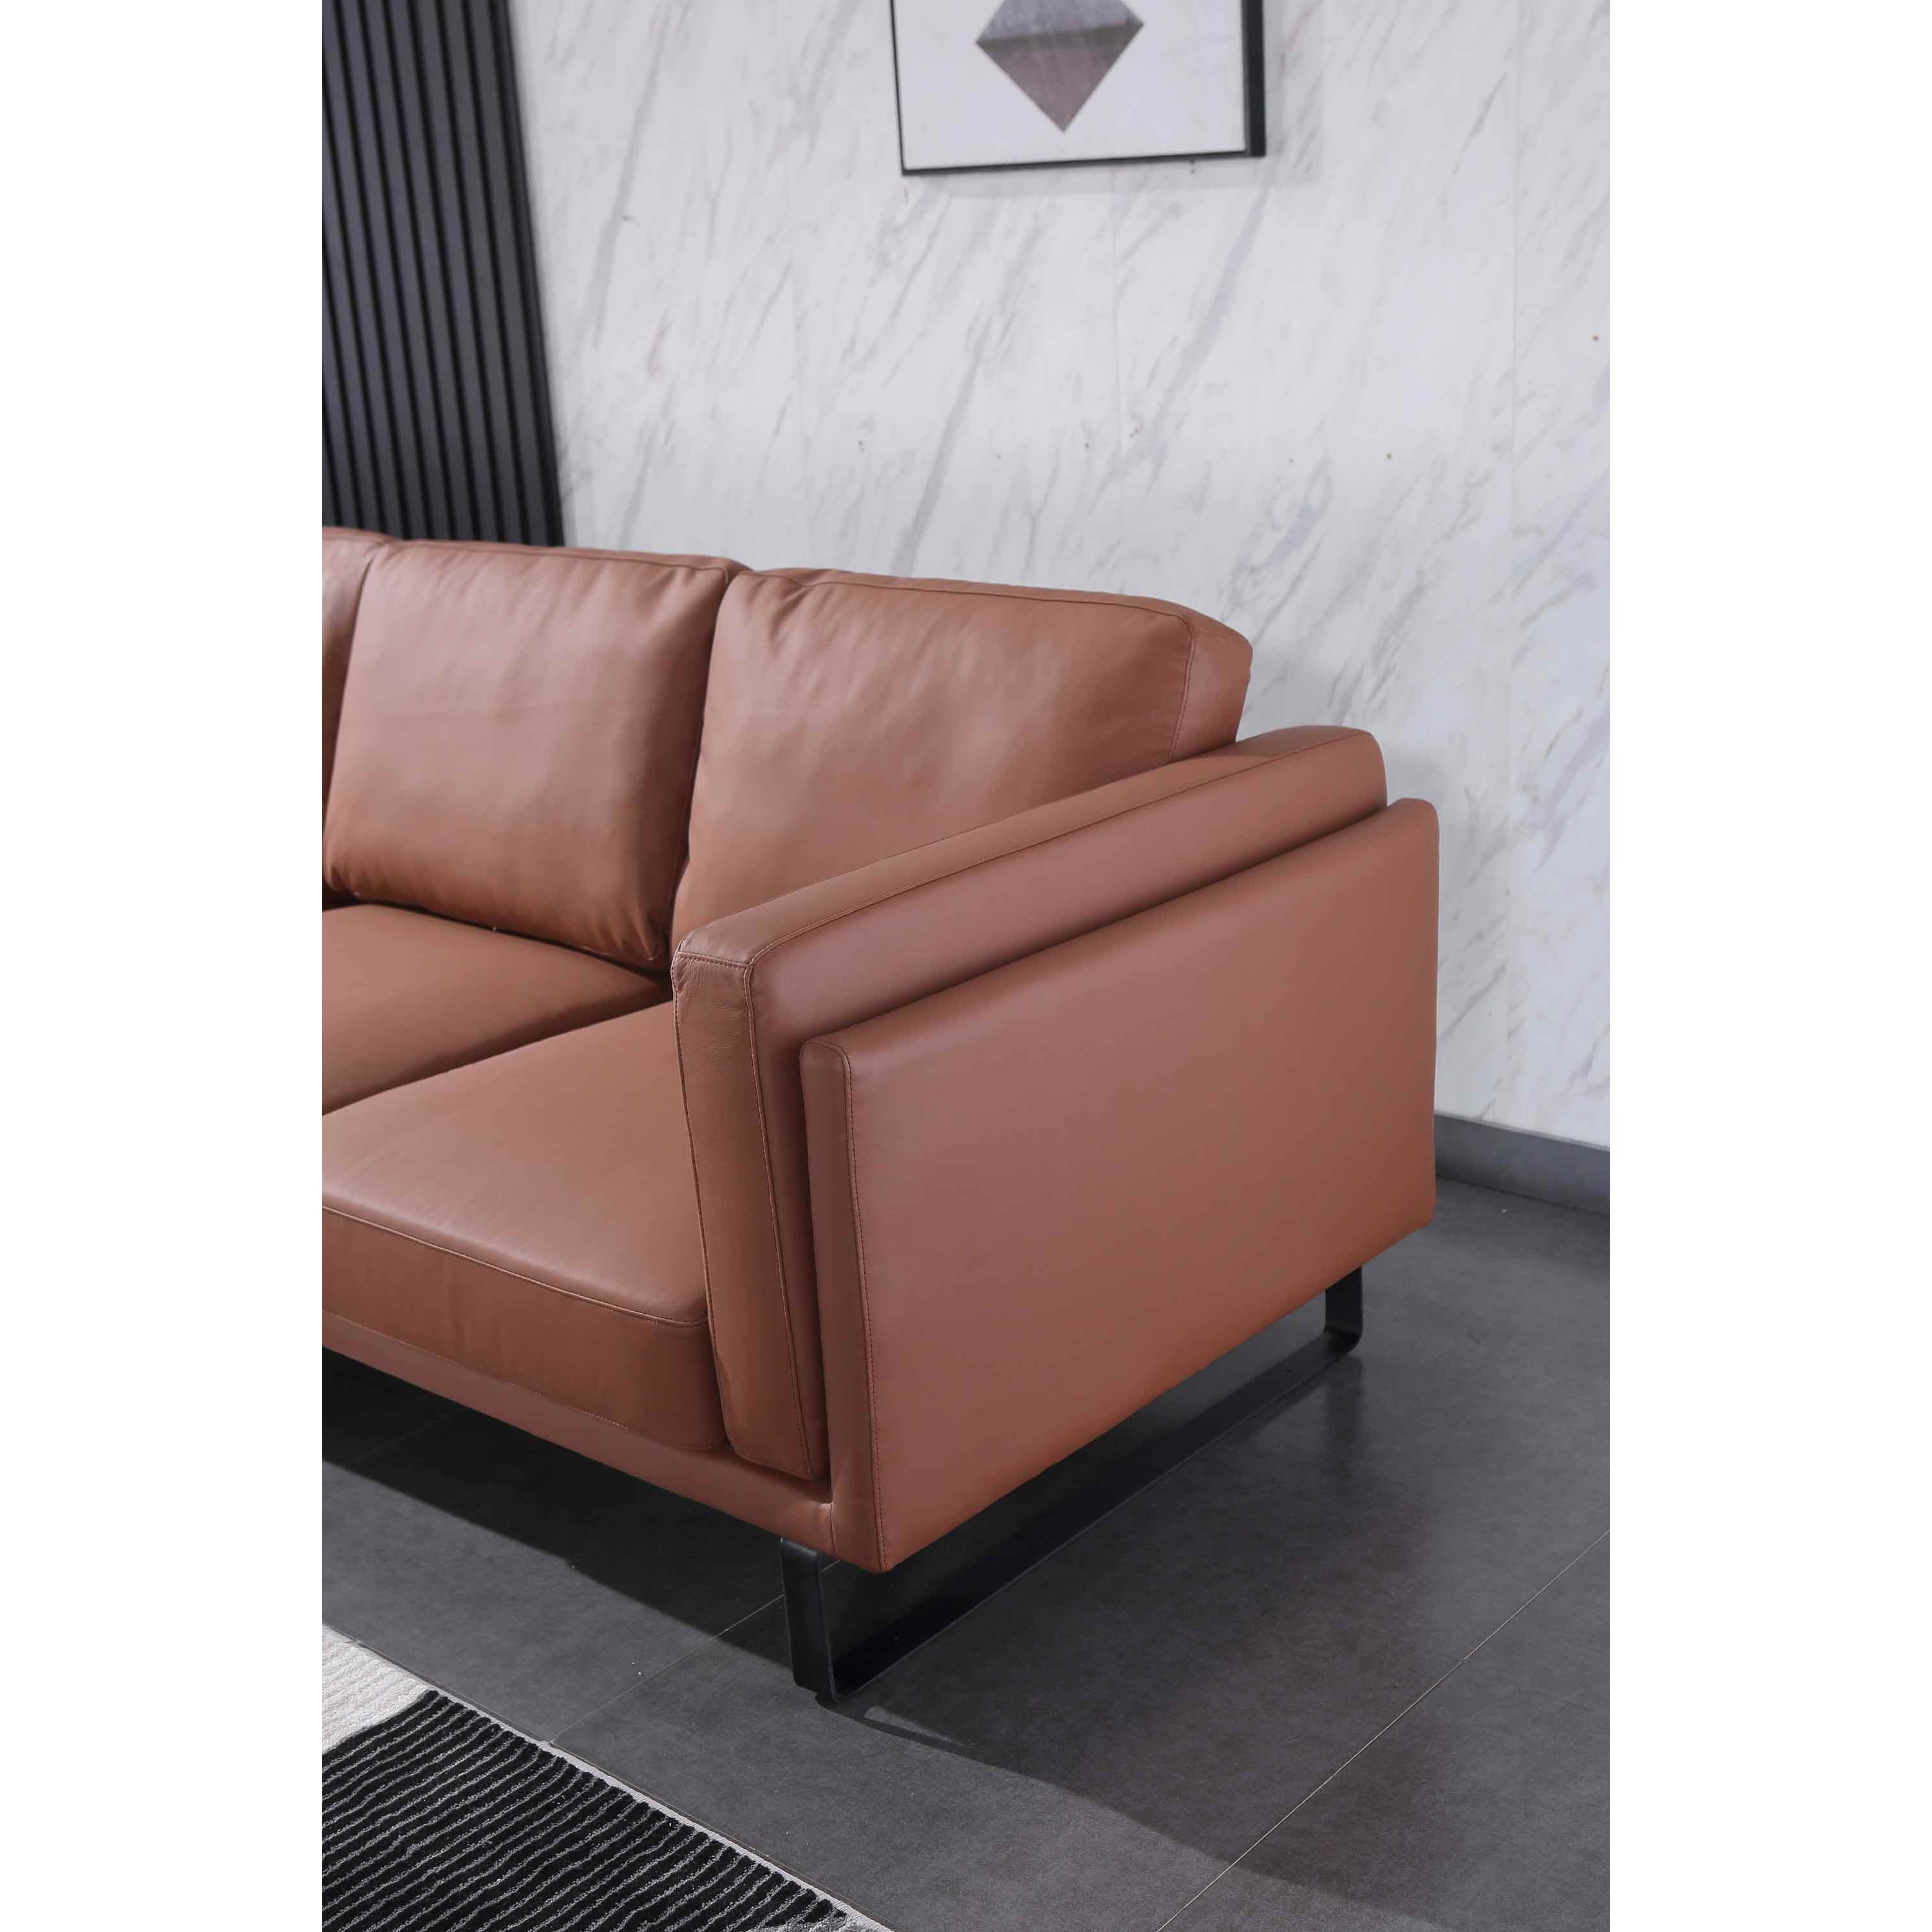 European Furniture - Fidelio Left Facing Sectional Russet Brown Italian Leather - EF-58665-2LHF - New Star Living